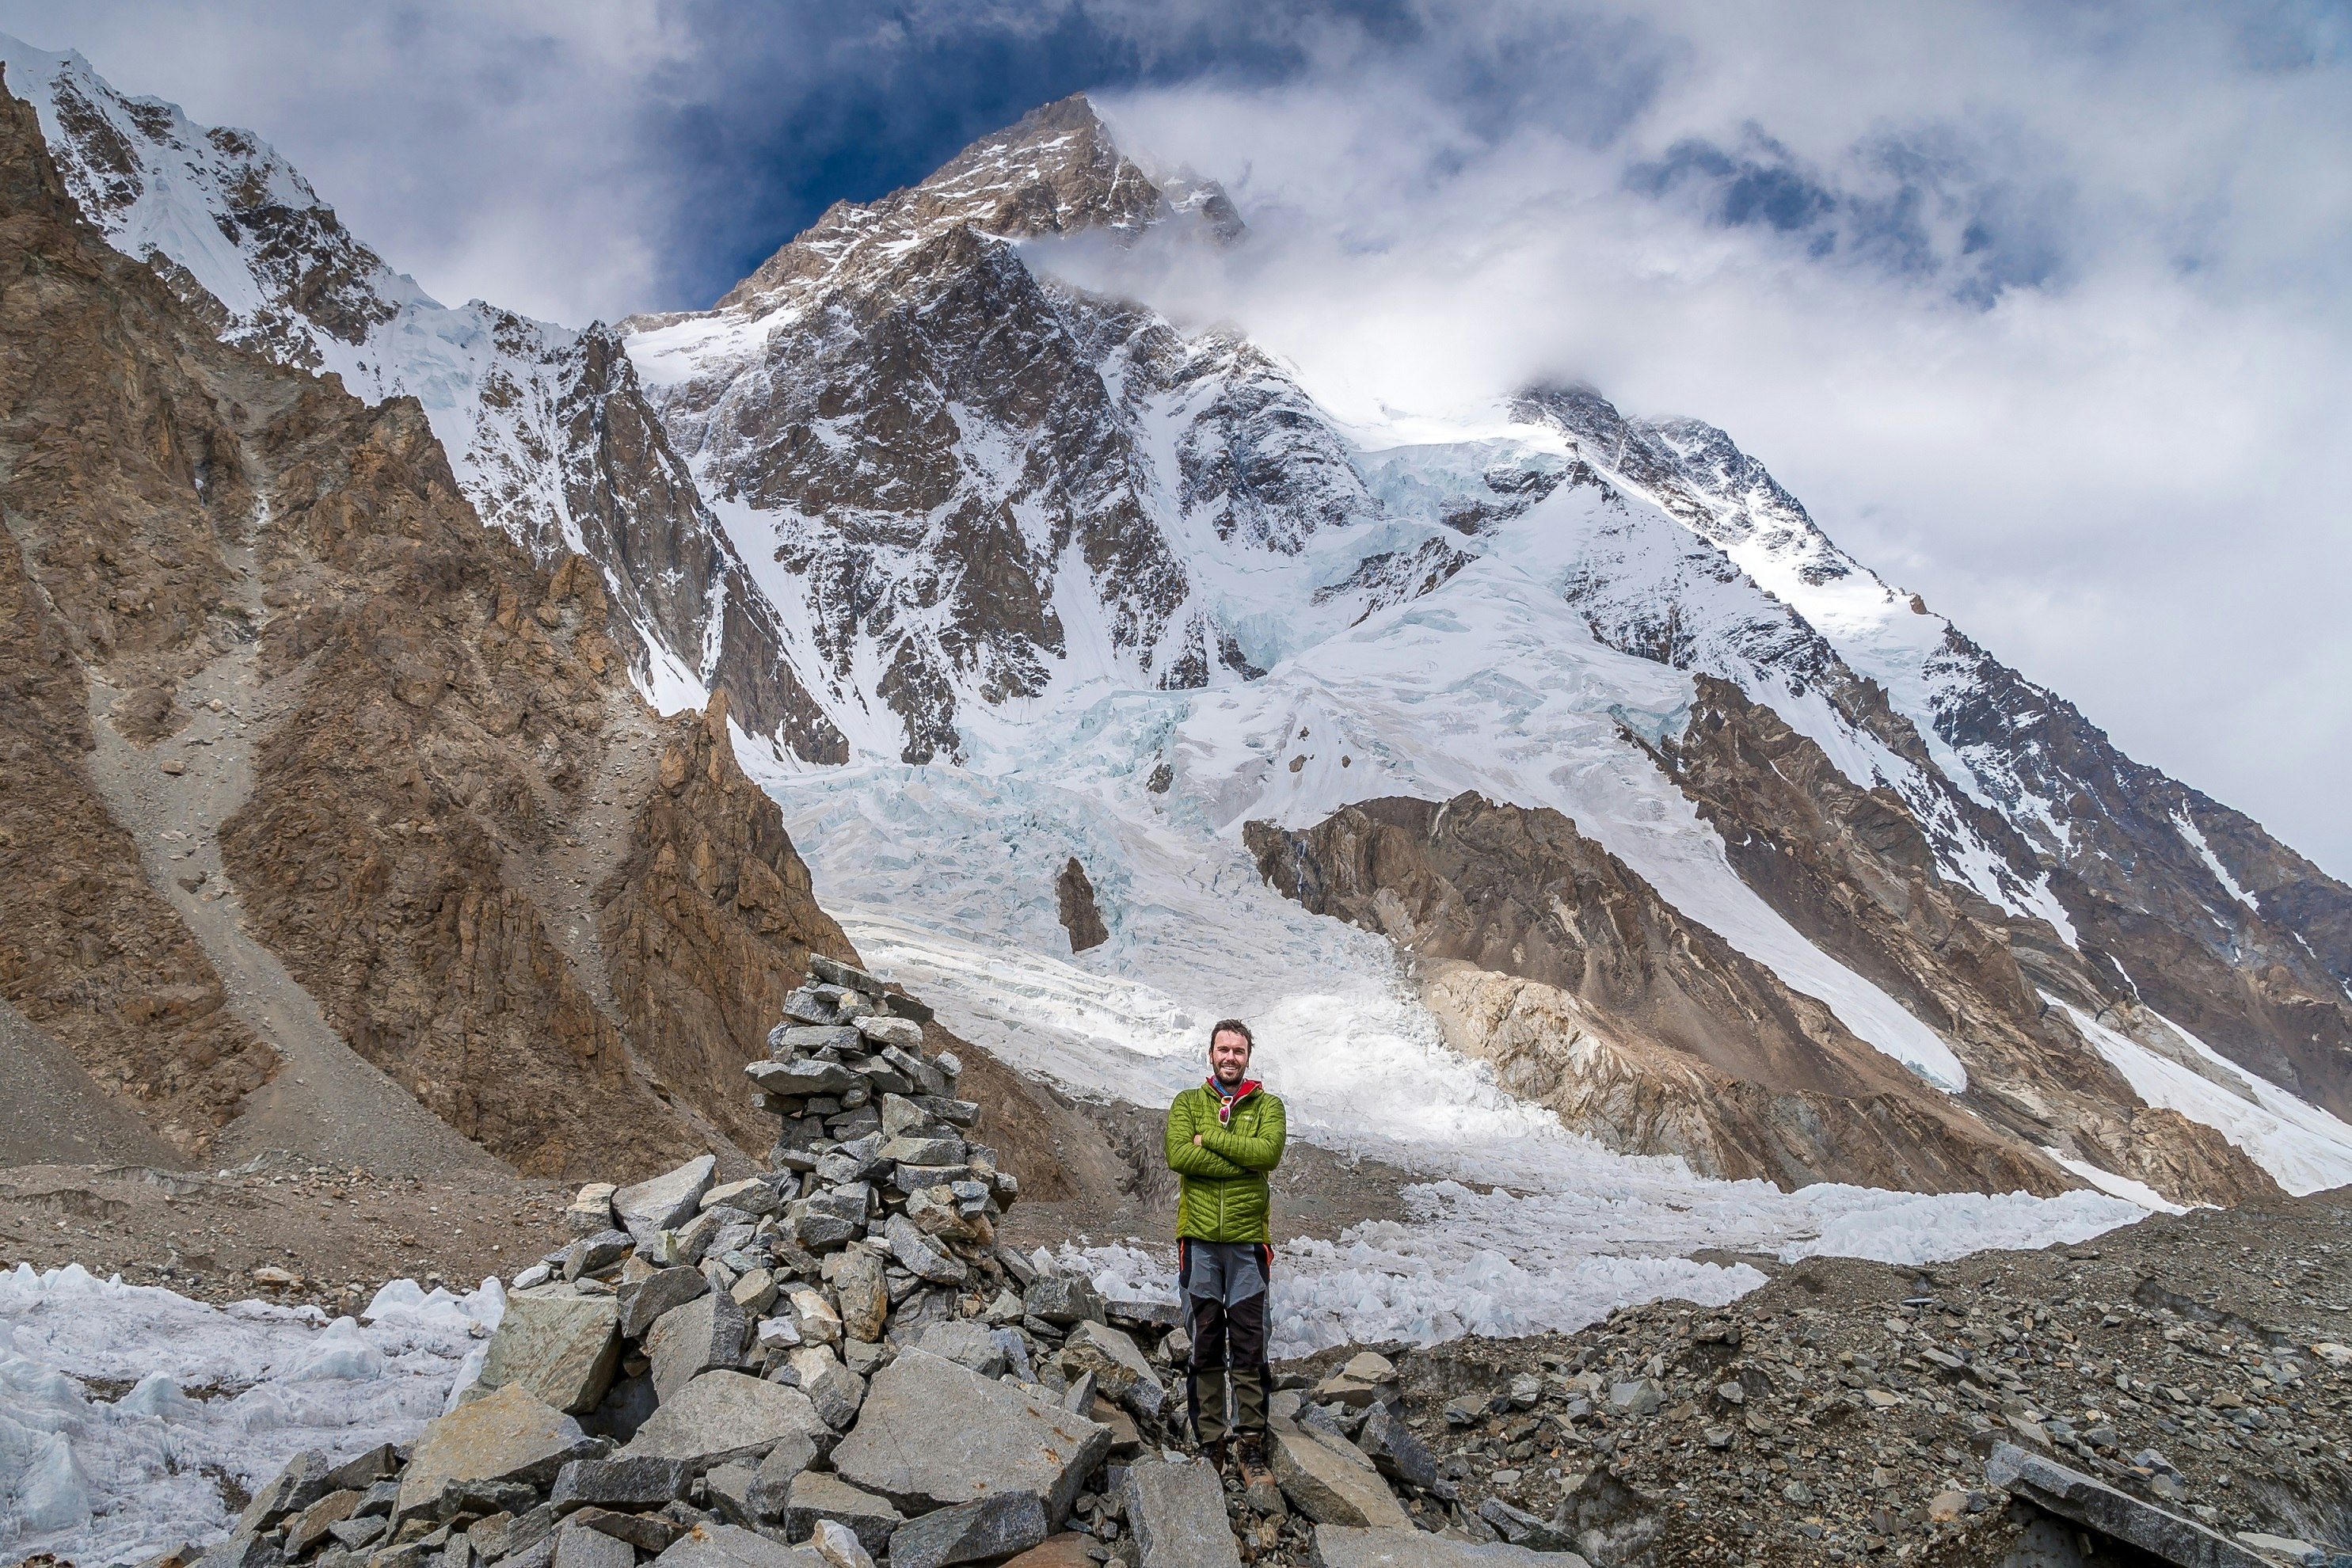 Peter, wearing a bright green trekking jacket, stands next to a small rock pile that marks K2 base camp. K2 is visible behind him, along with other, smaller, mountain peaks.